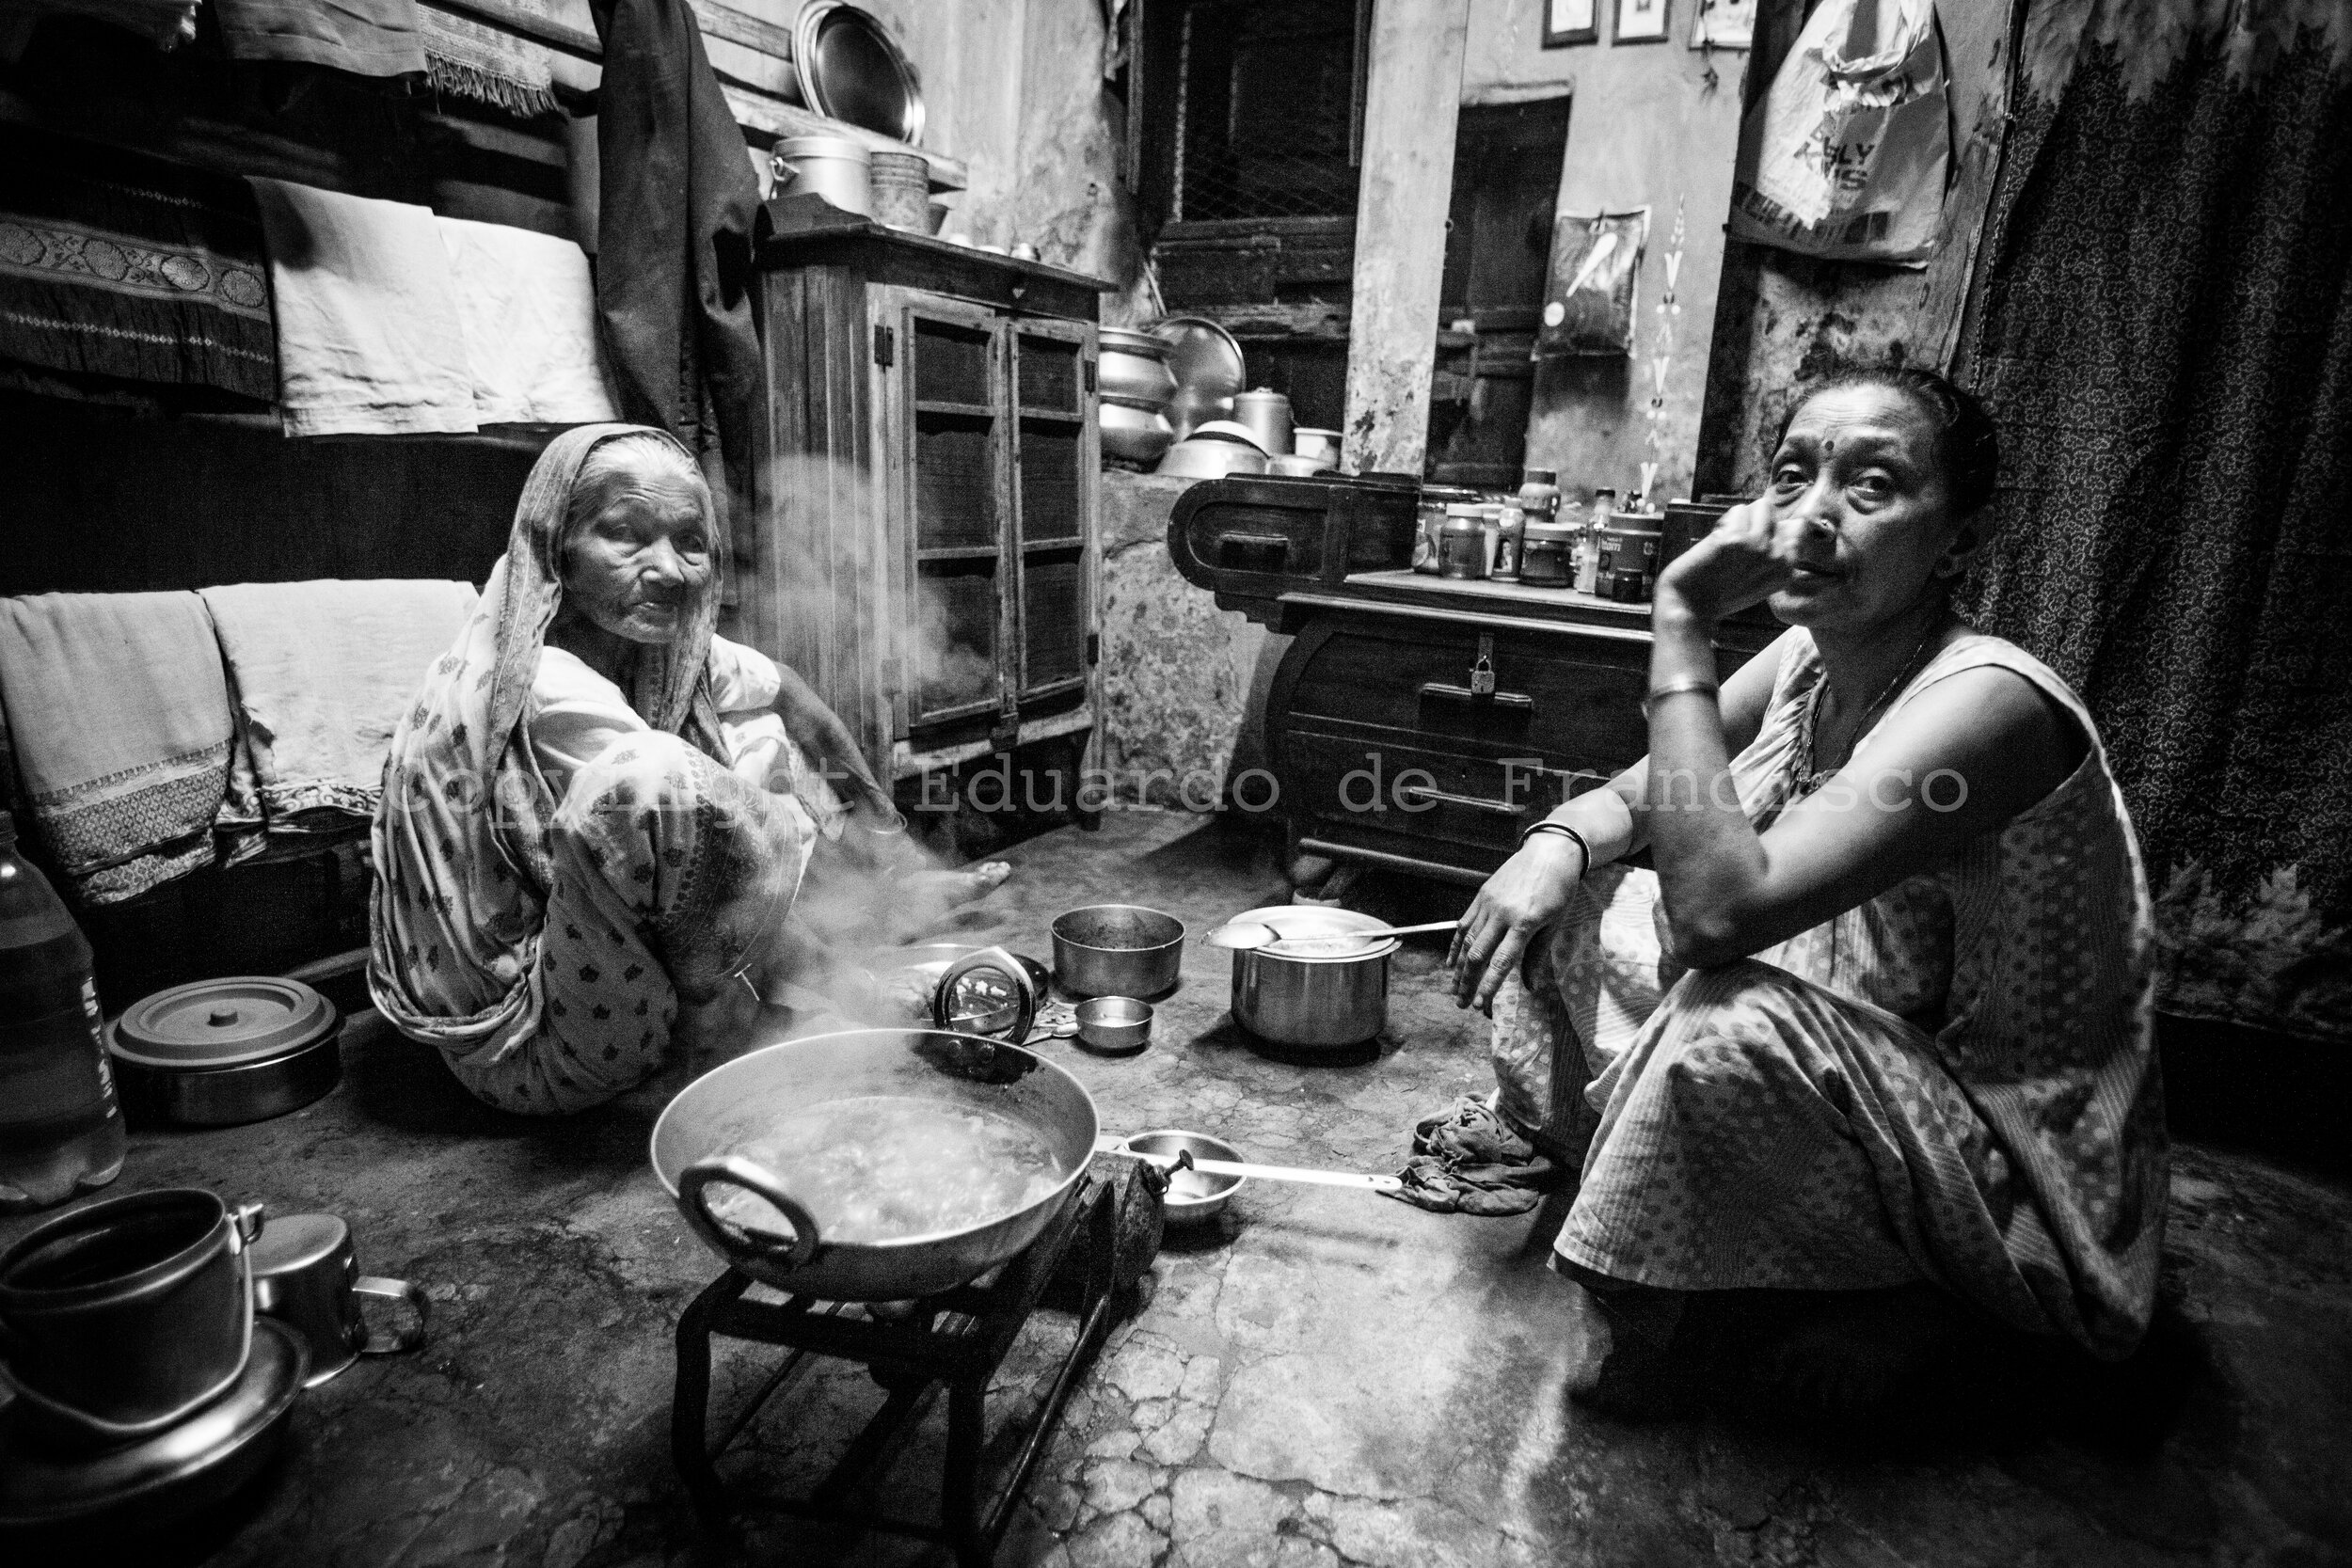  Tubhi Devi Thapa (on the left side), a Nepali woman who arrived to Sonagachi when she was 15. Her daughter, at the right side, works as a prostitute in the room shown in the picture and which also doubles as the home of both. 